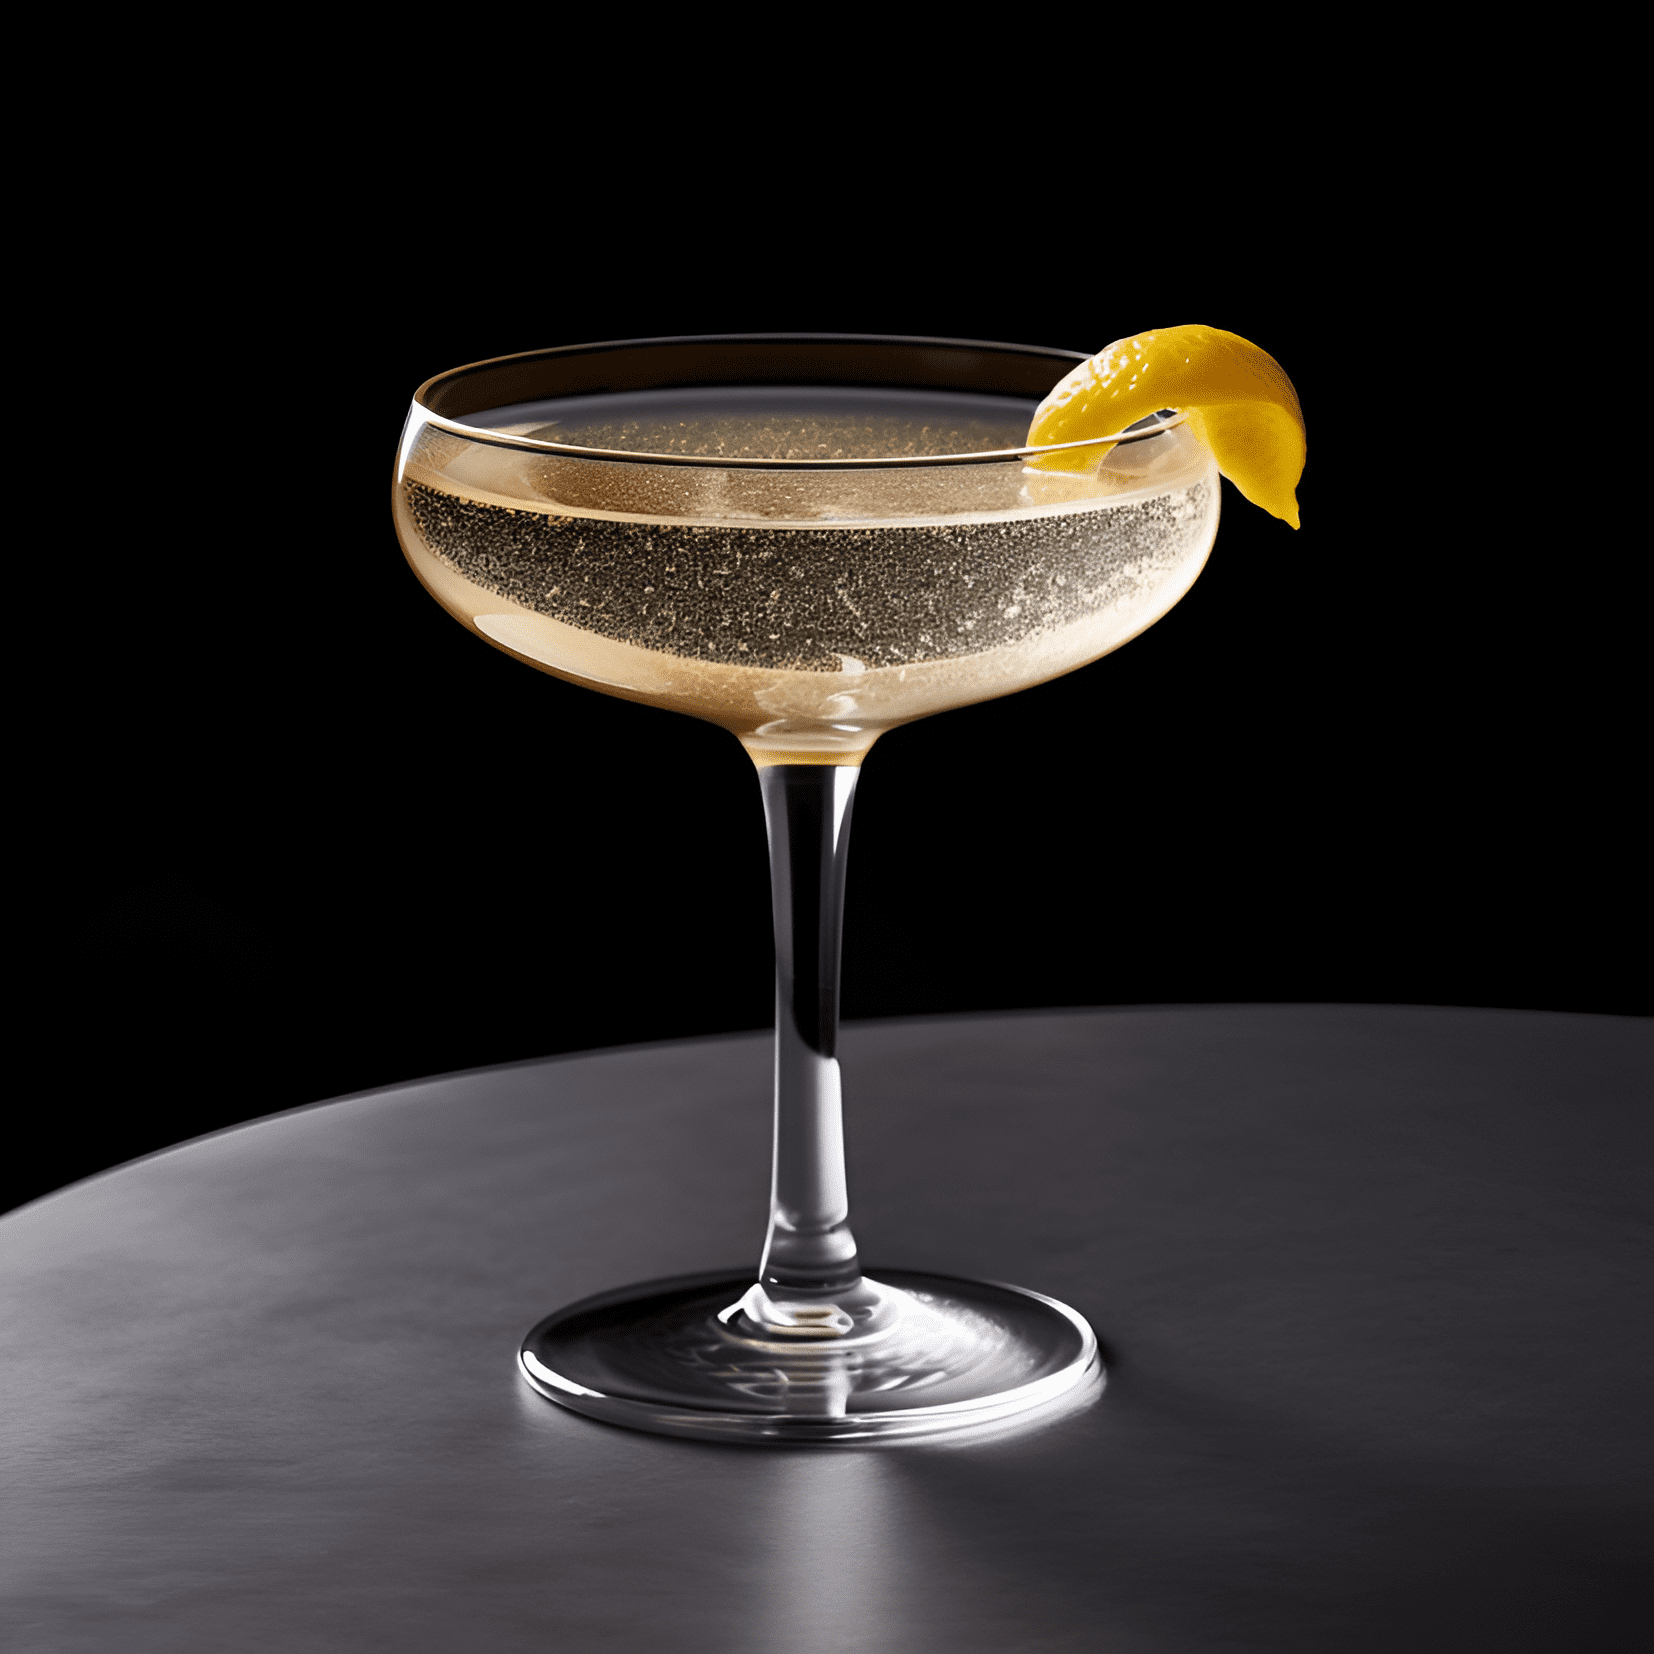 Jubilee Cocktail Recipe - The Jubilee cocktail is a delightful blend of sweet, sour, and fruity flavors. It has a smooth, velvety texture with a hint of citrus and a subtle, lingering sweetness. The drink is well-balanced, making it a refreshing and satisfying choice for any occasion.